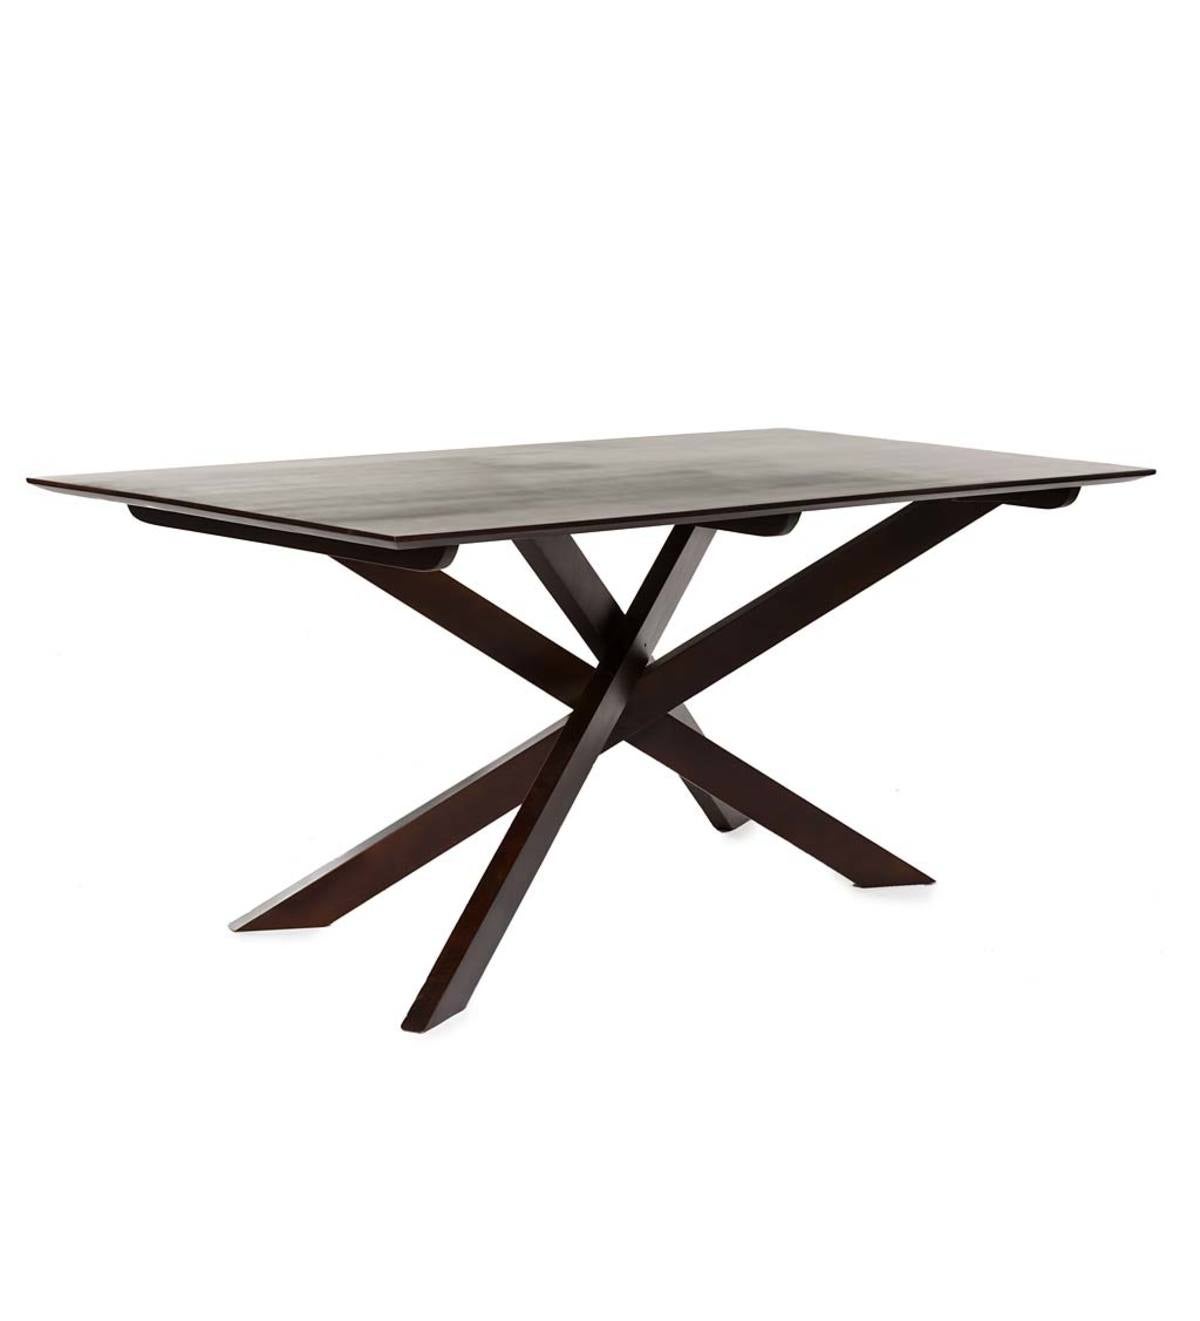 The James Multi Beam Dining Table